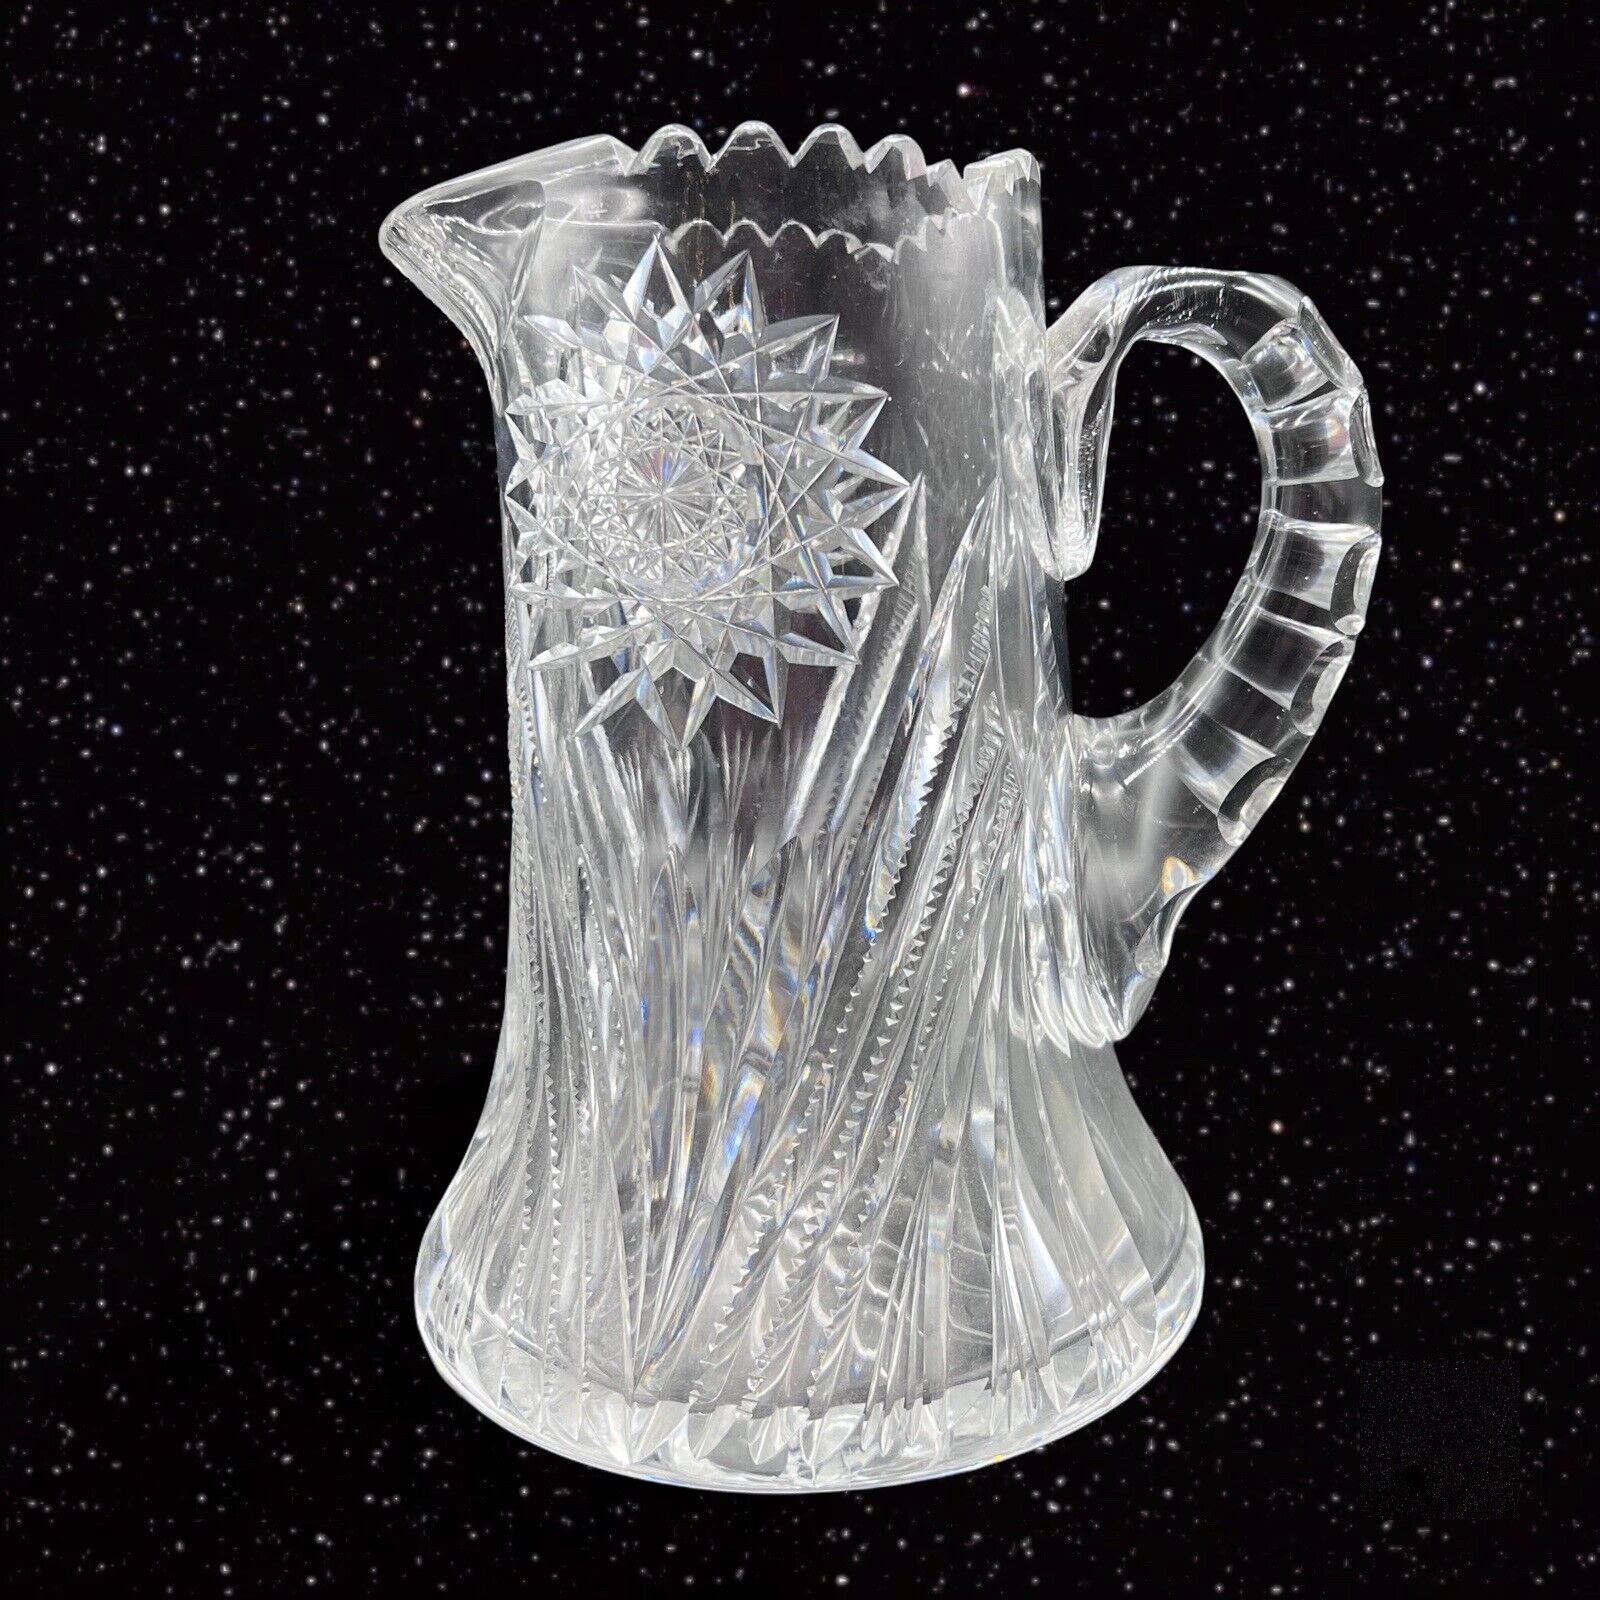 VINTAGE AMERICAN BRILLIANT BEADED CRYSTAL PITCHER CARAFE ART GLASS 8”t 6.5”w